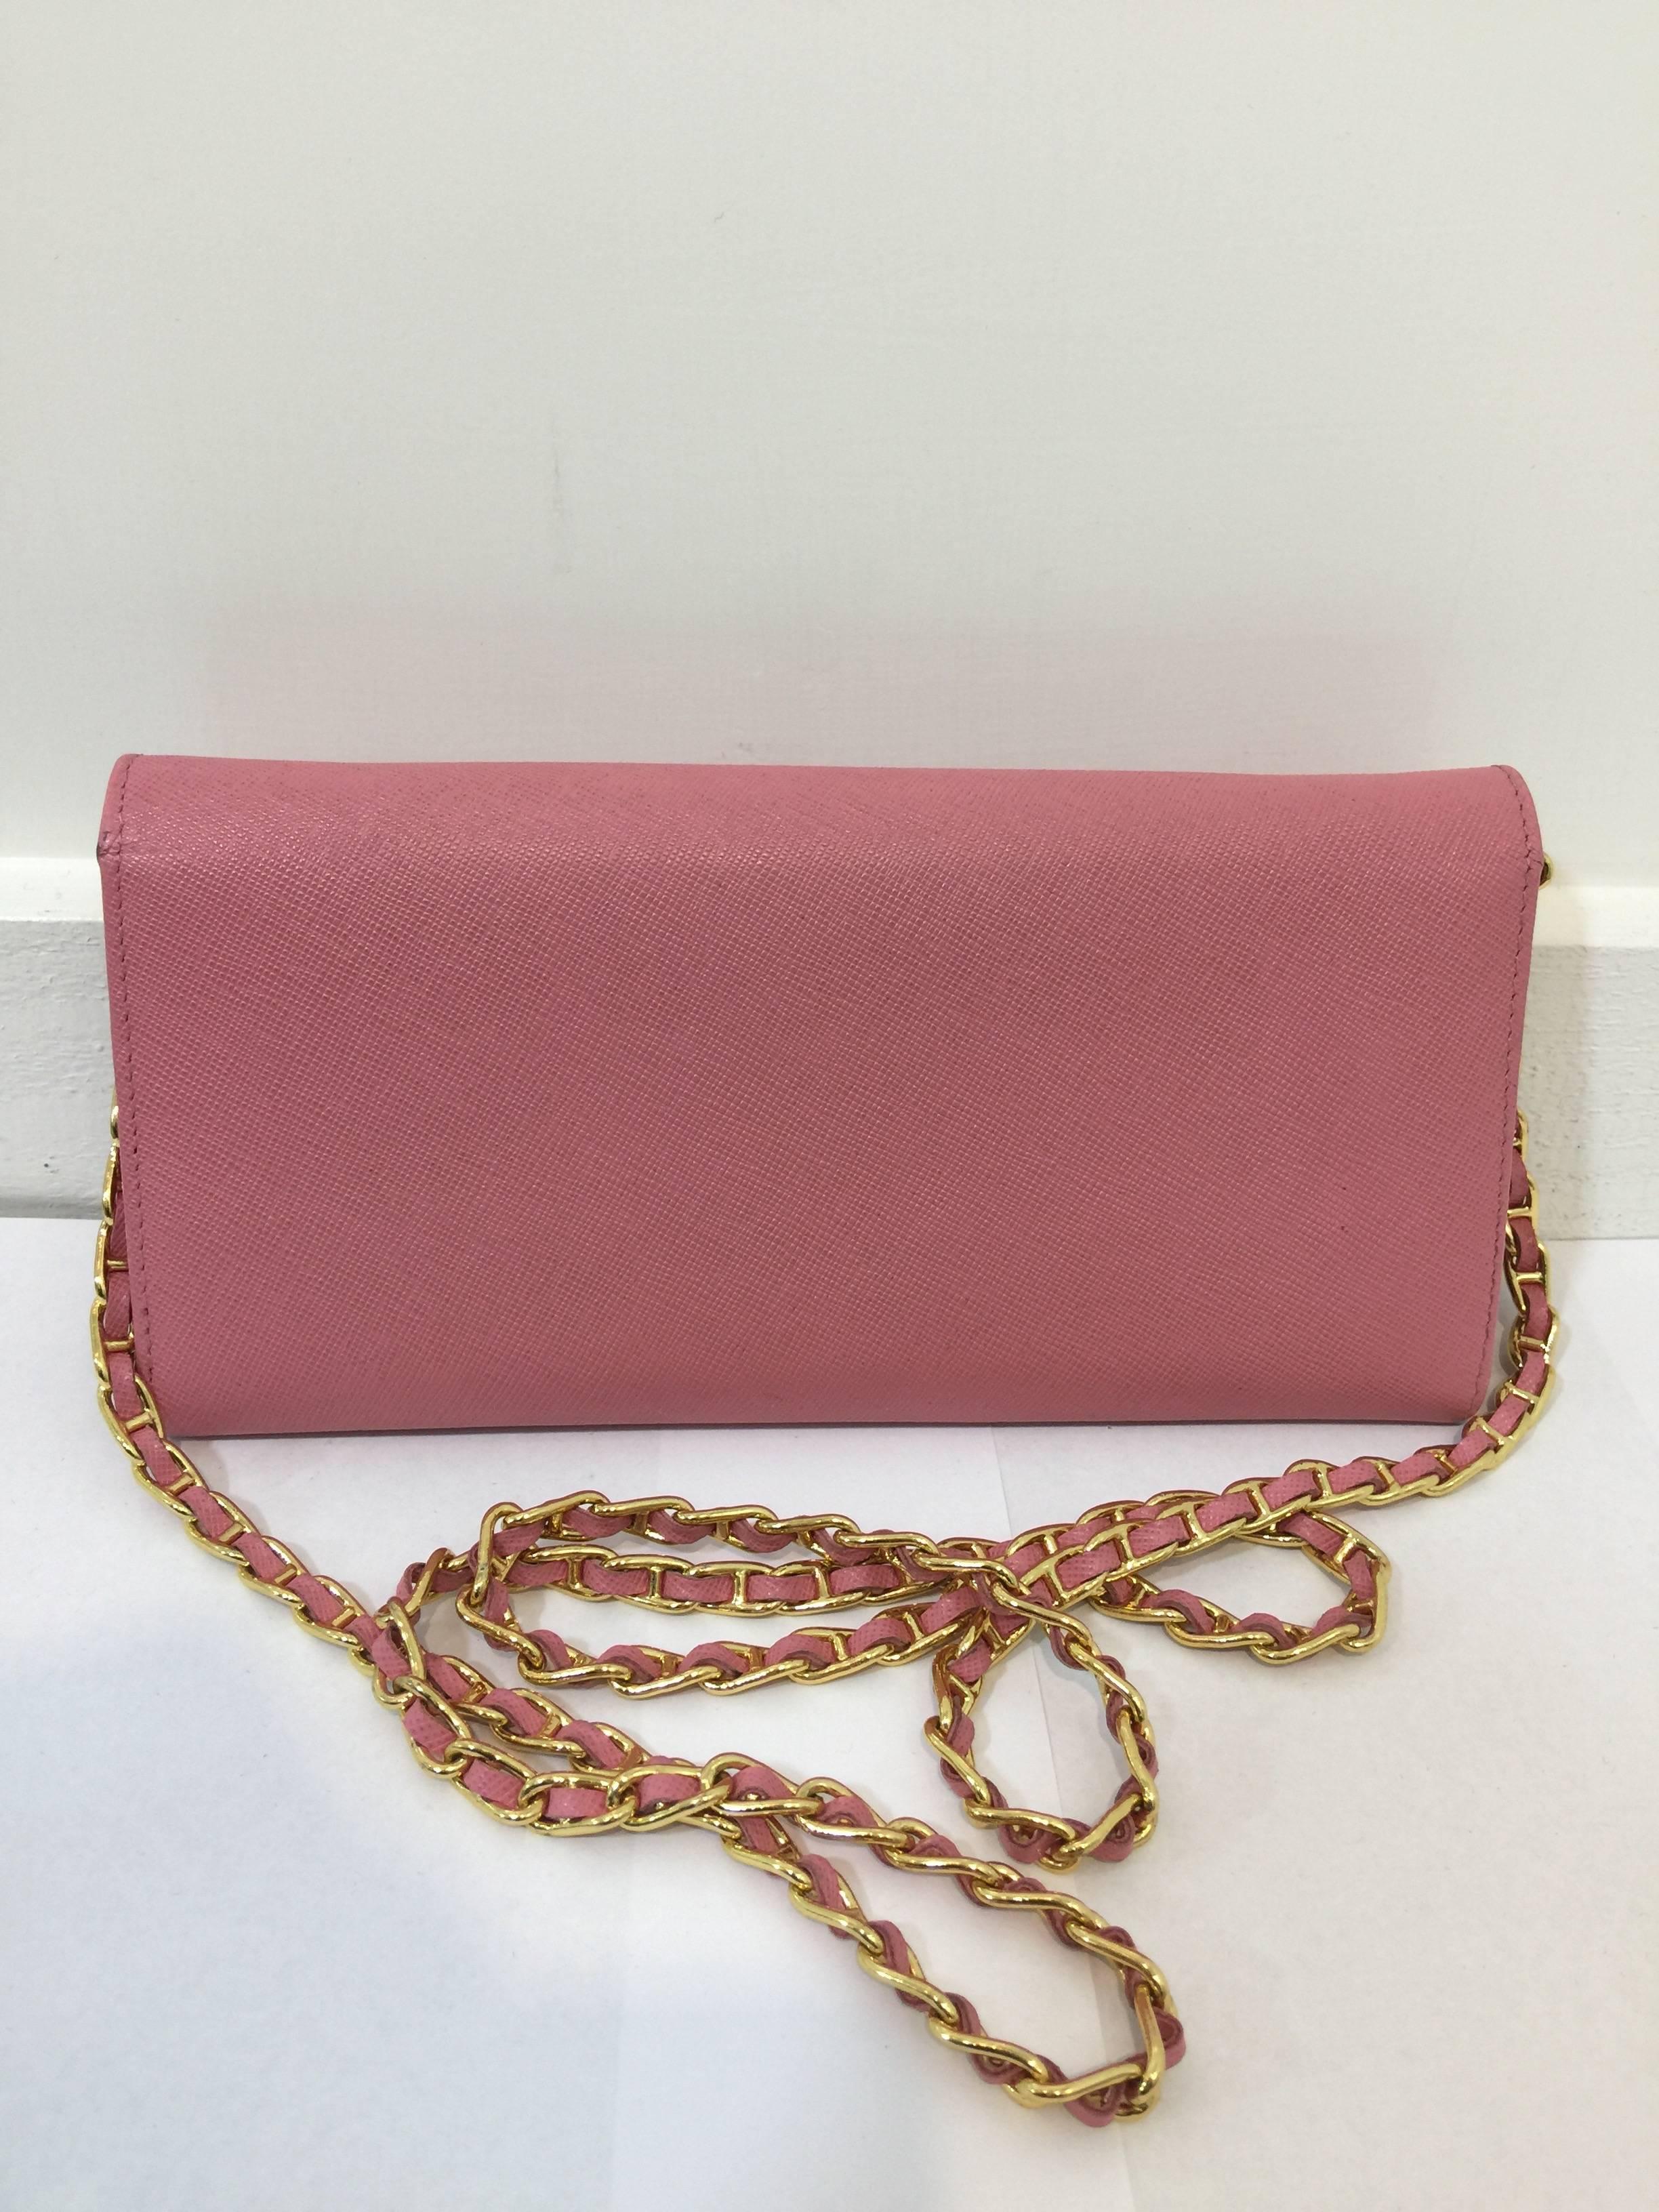 Women's Prada Pink Saffiano Leather Wallet on a Chain 